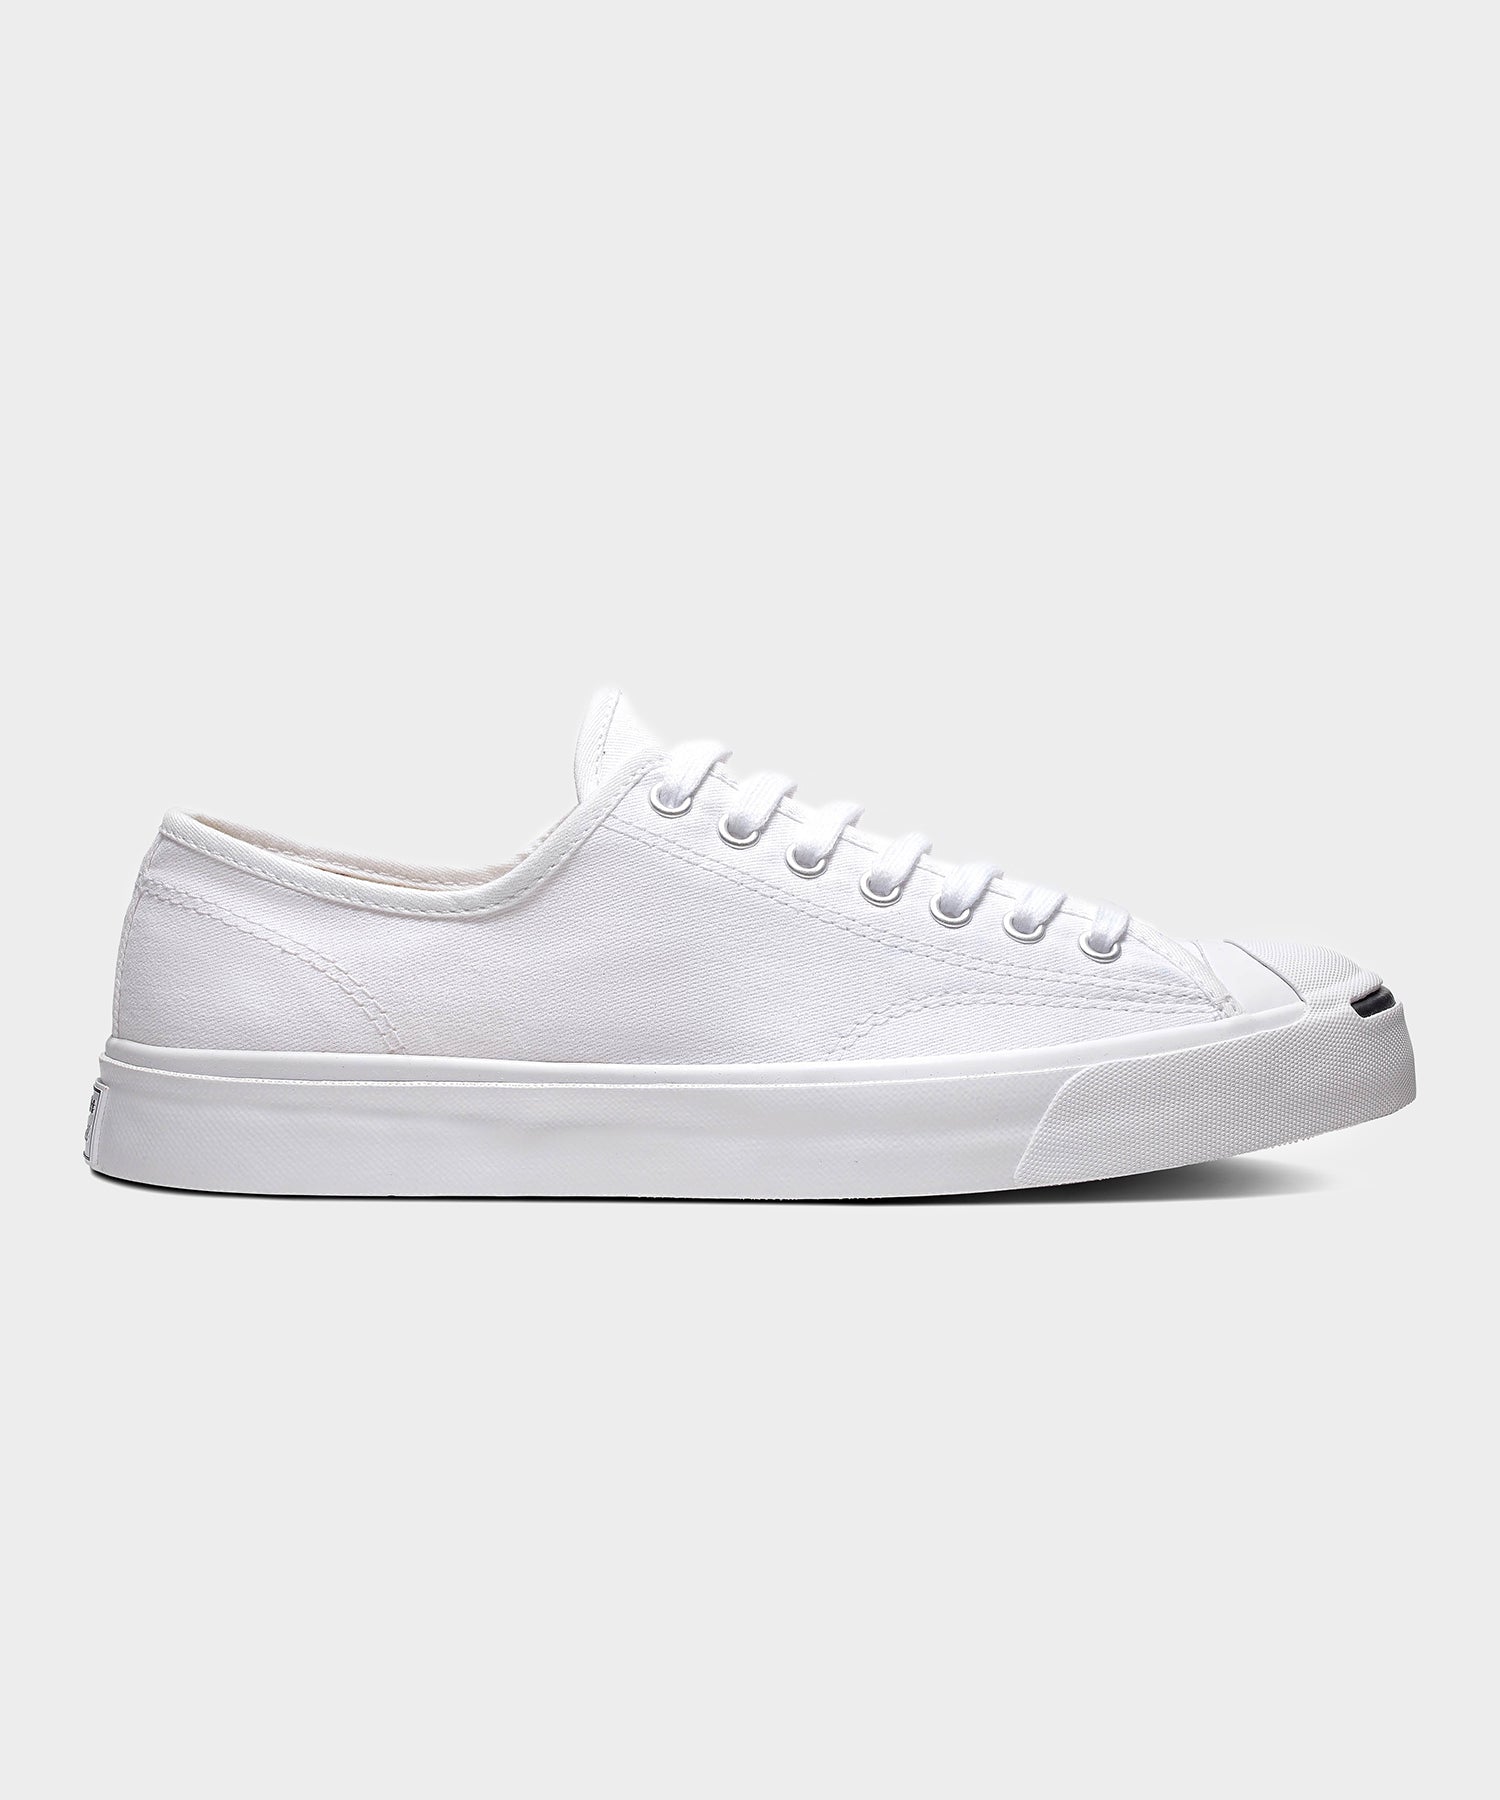 Converse Jack Purcell Canvas in White